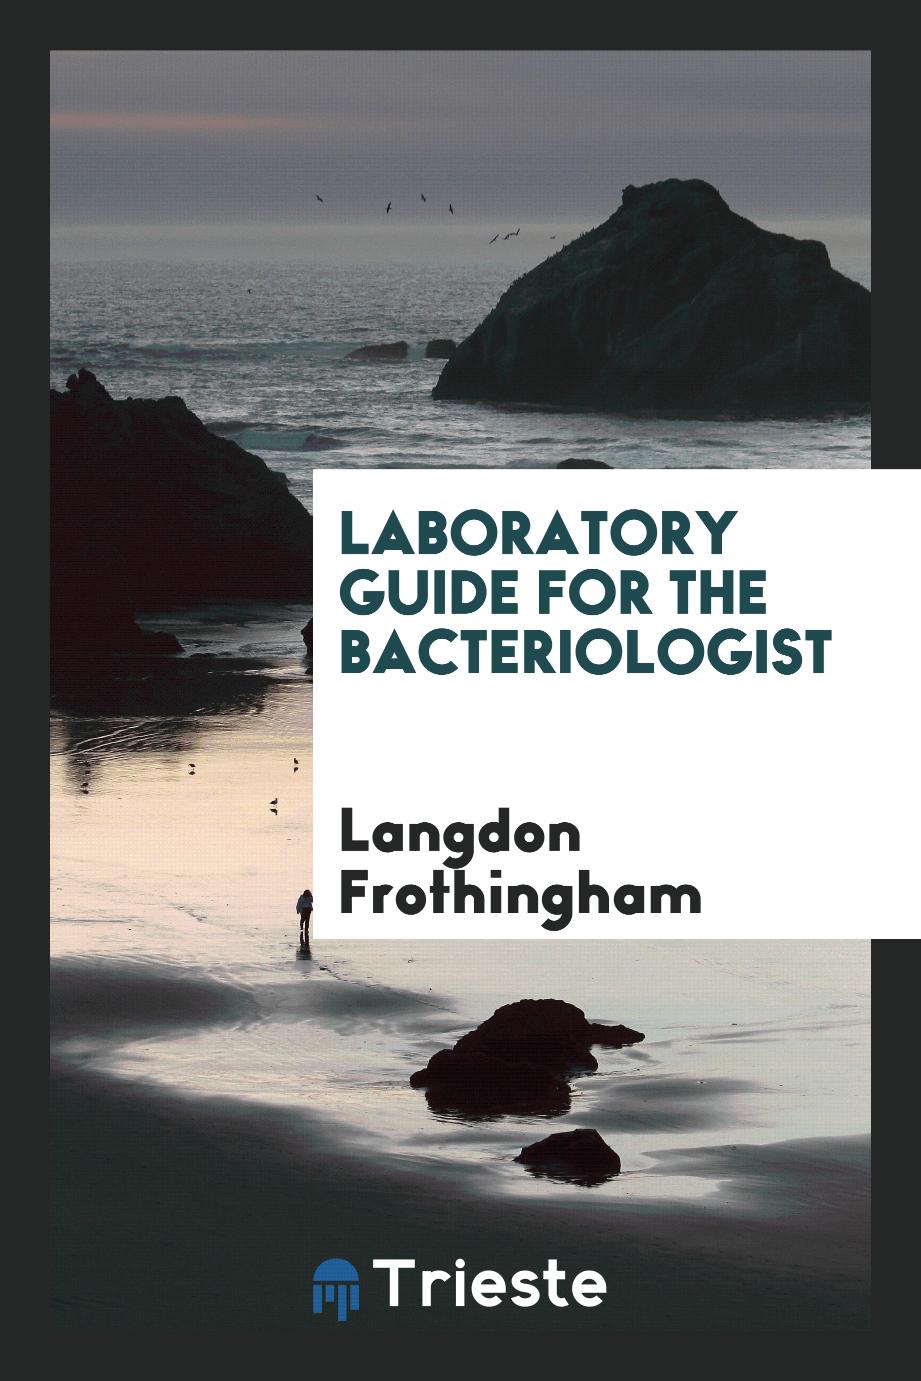 Laboratory guide for the bacteriologist